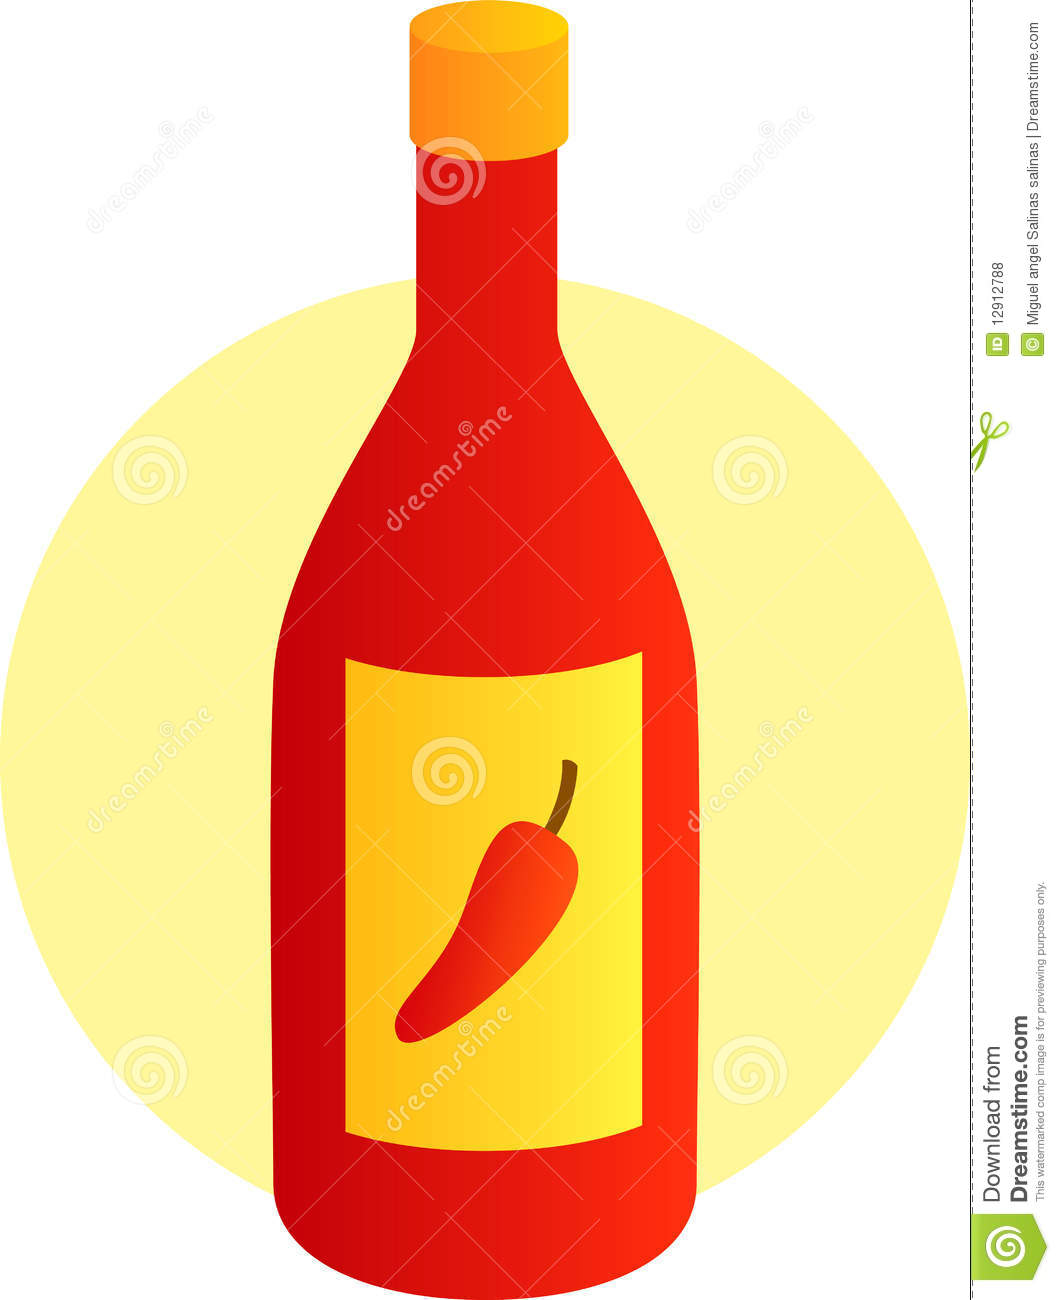 Red Hot Chili Sauce Bottle Royalty Free Stock Photos   Image  12912788